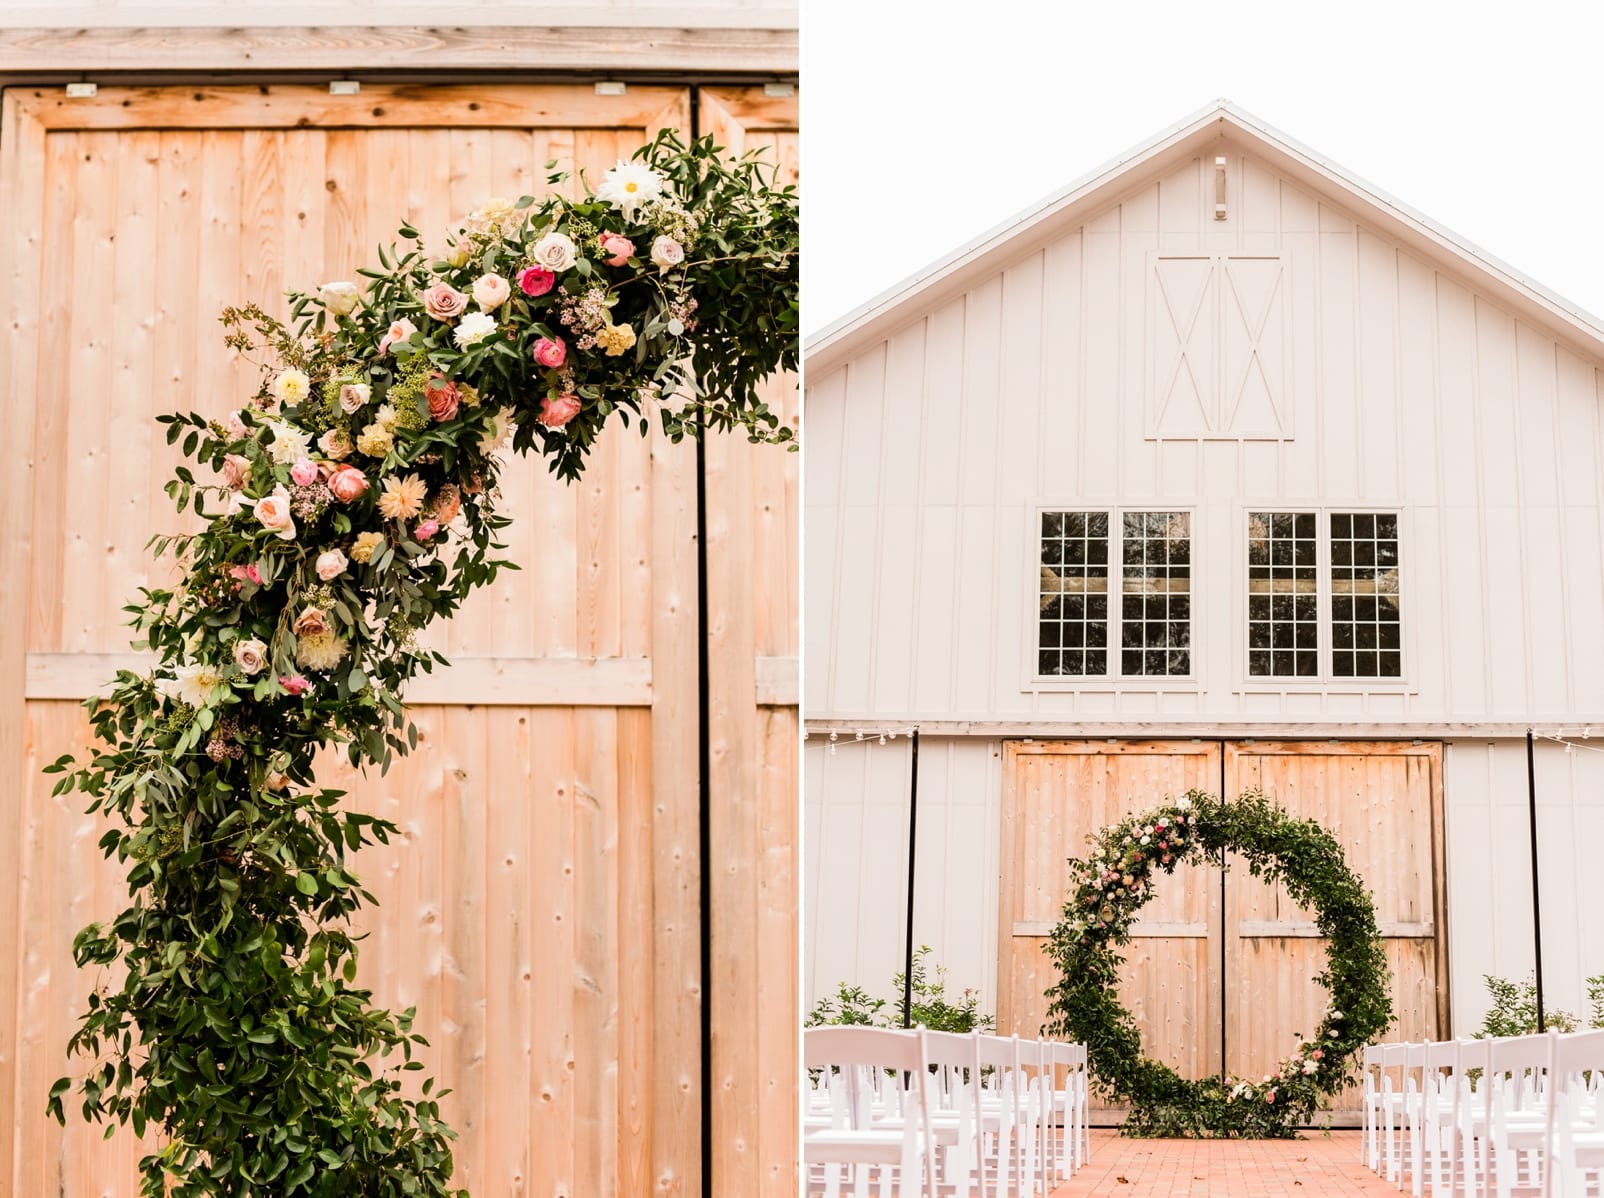 Barn of Chapel Hill at Wild Flora Farm ceremony space with tall wooden barn doors and large circle floral installation with greenery and light pink flowers photo